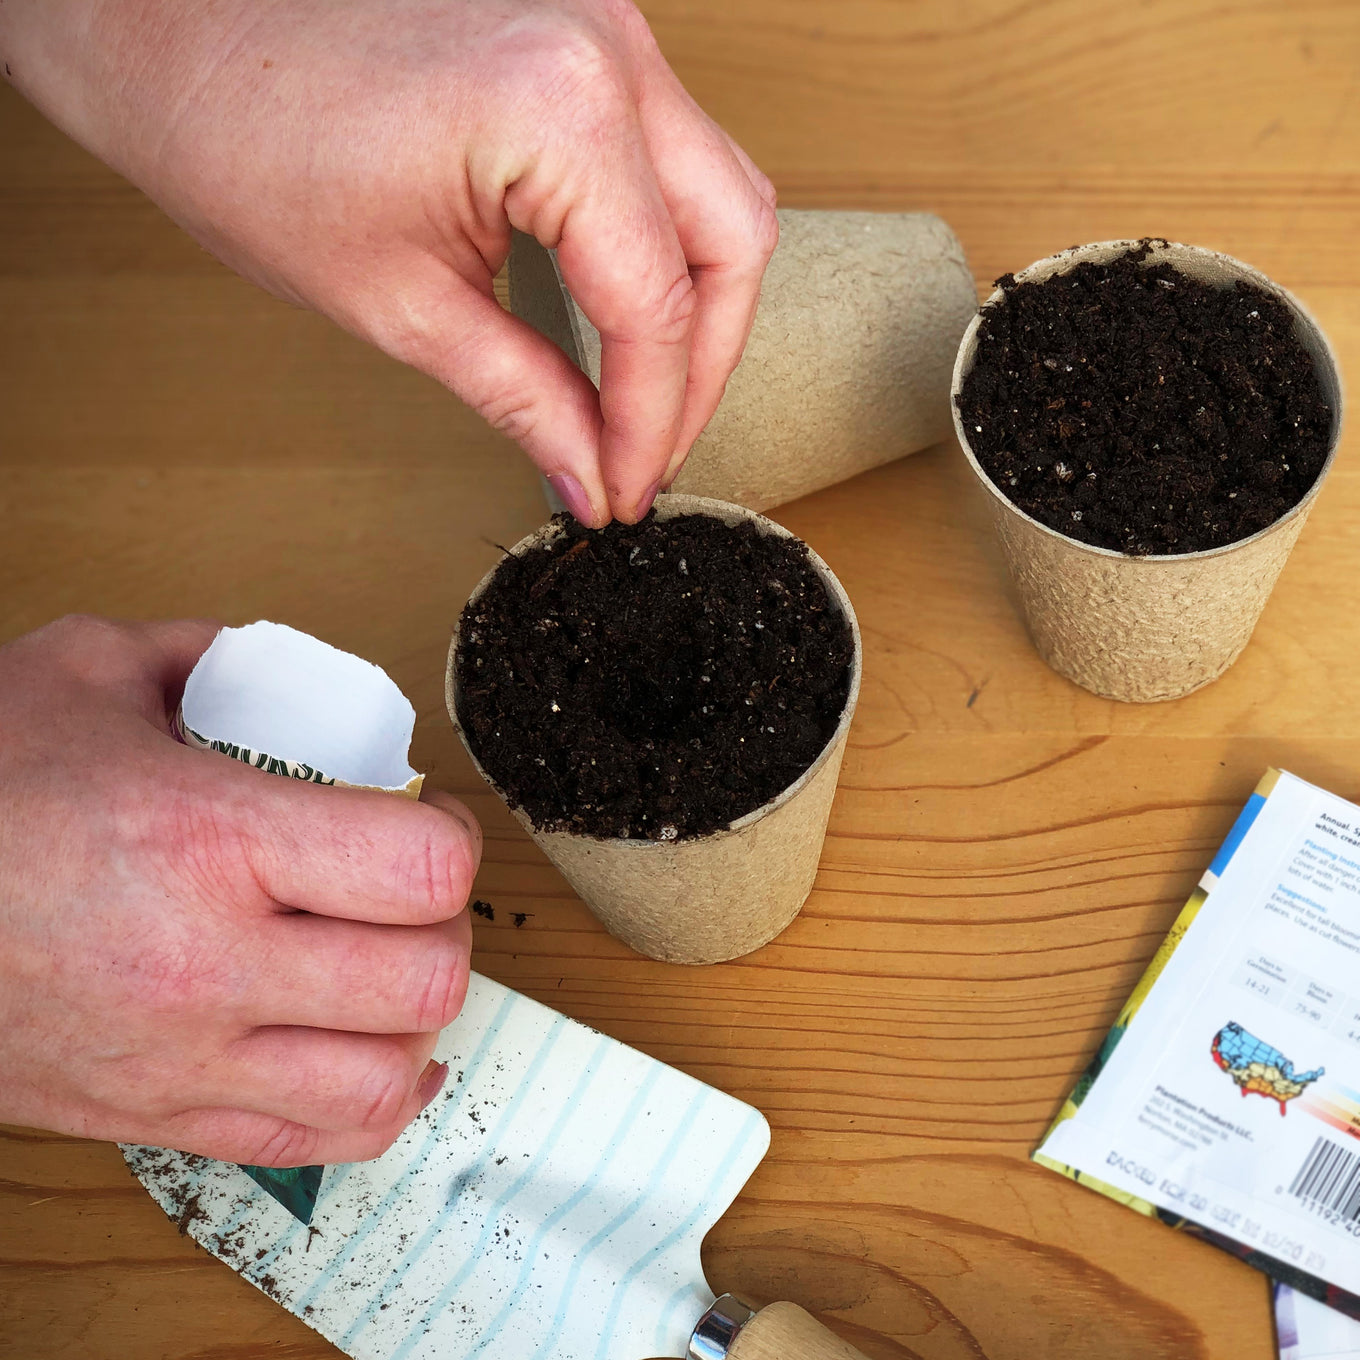 Sowing Heirloom Abe Lincoln Tomato Seeds into Jiffy biodegradable peat pots for easy transplanting.